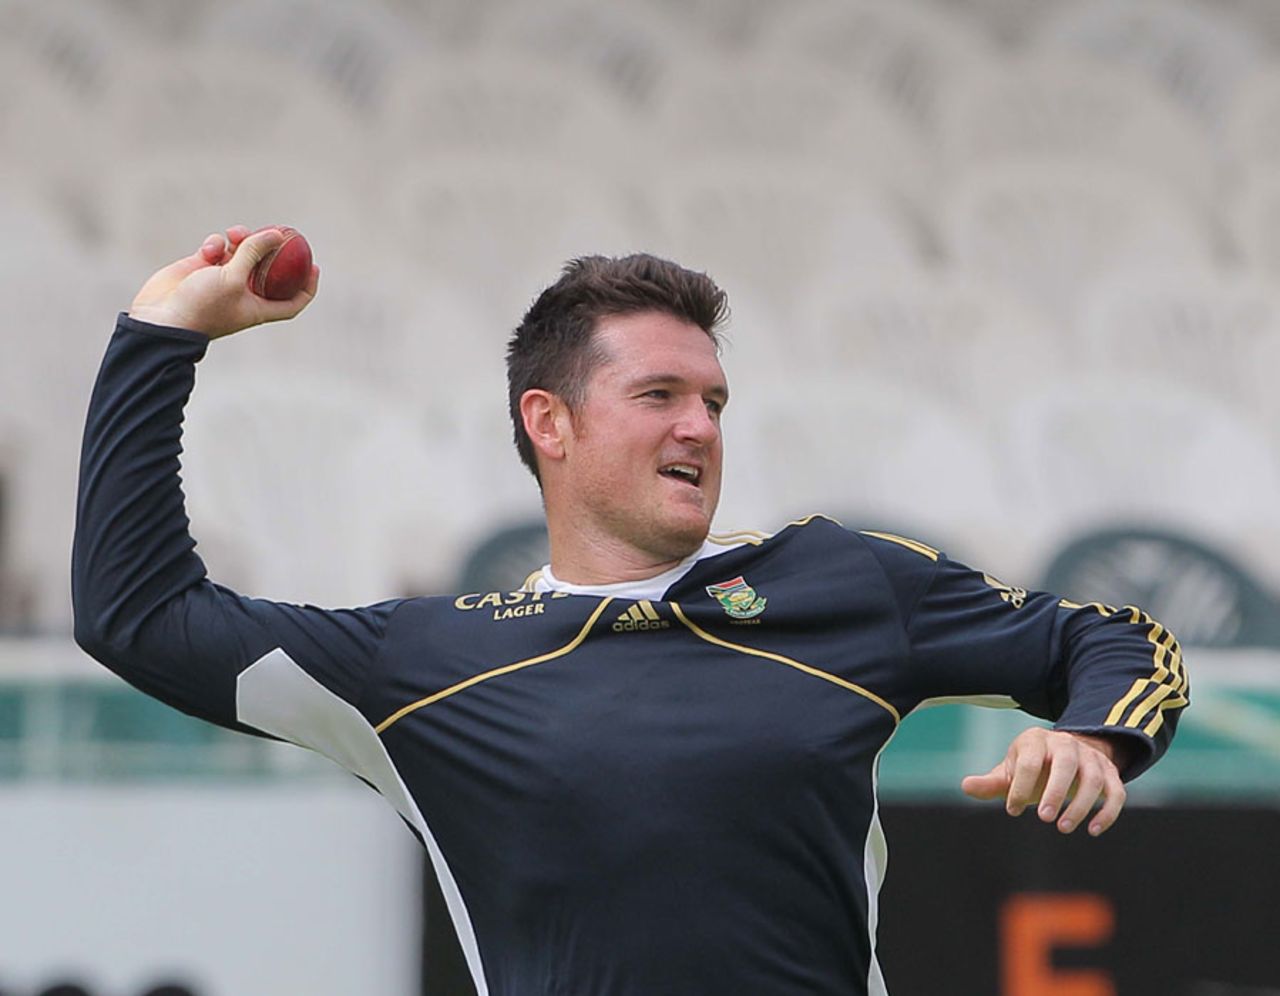 Graeme Smith gets in some fielding drills, Cape Town, December 30, 2012